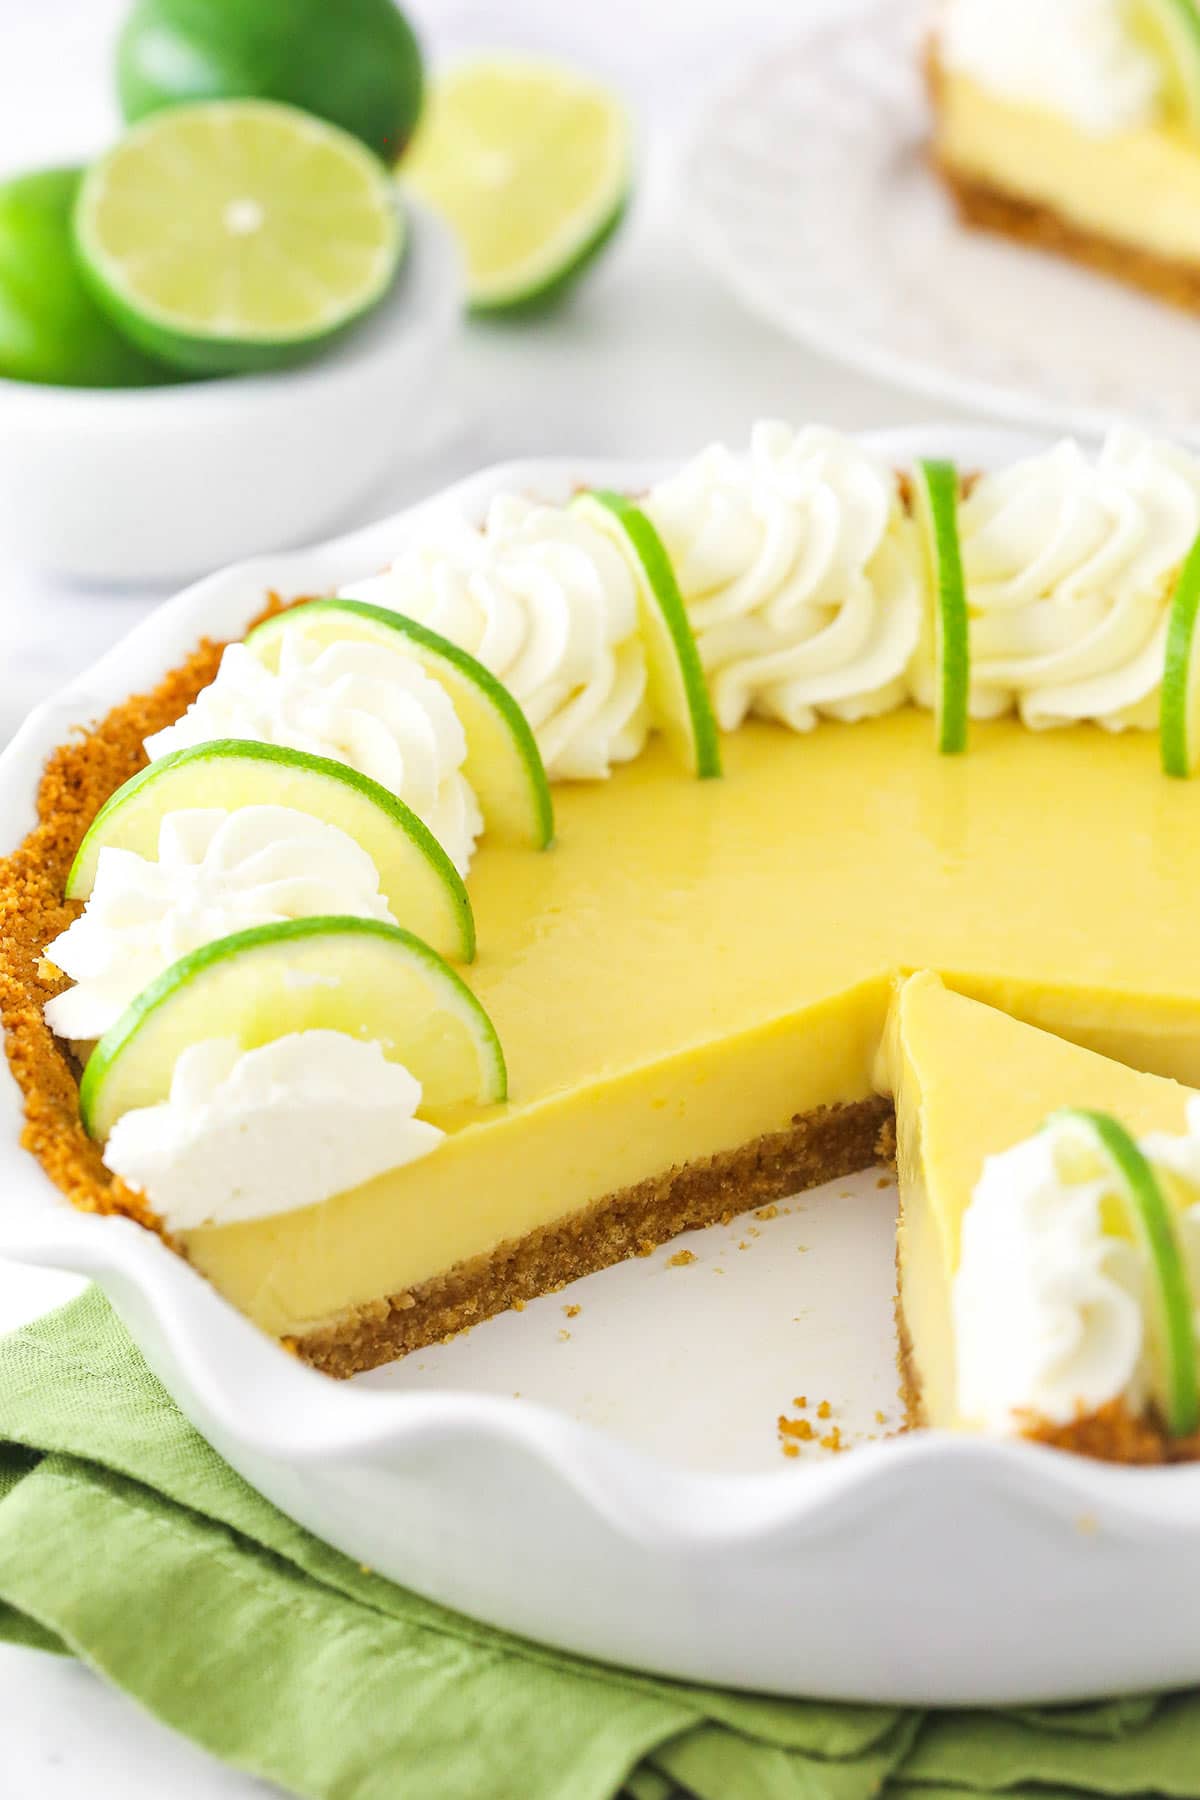 A homemade key lime pie inside of a pie dish with one slice missing and a bowl of fresh limes in the background